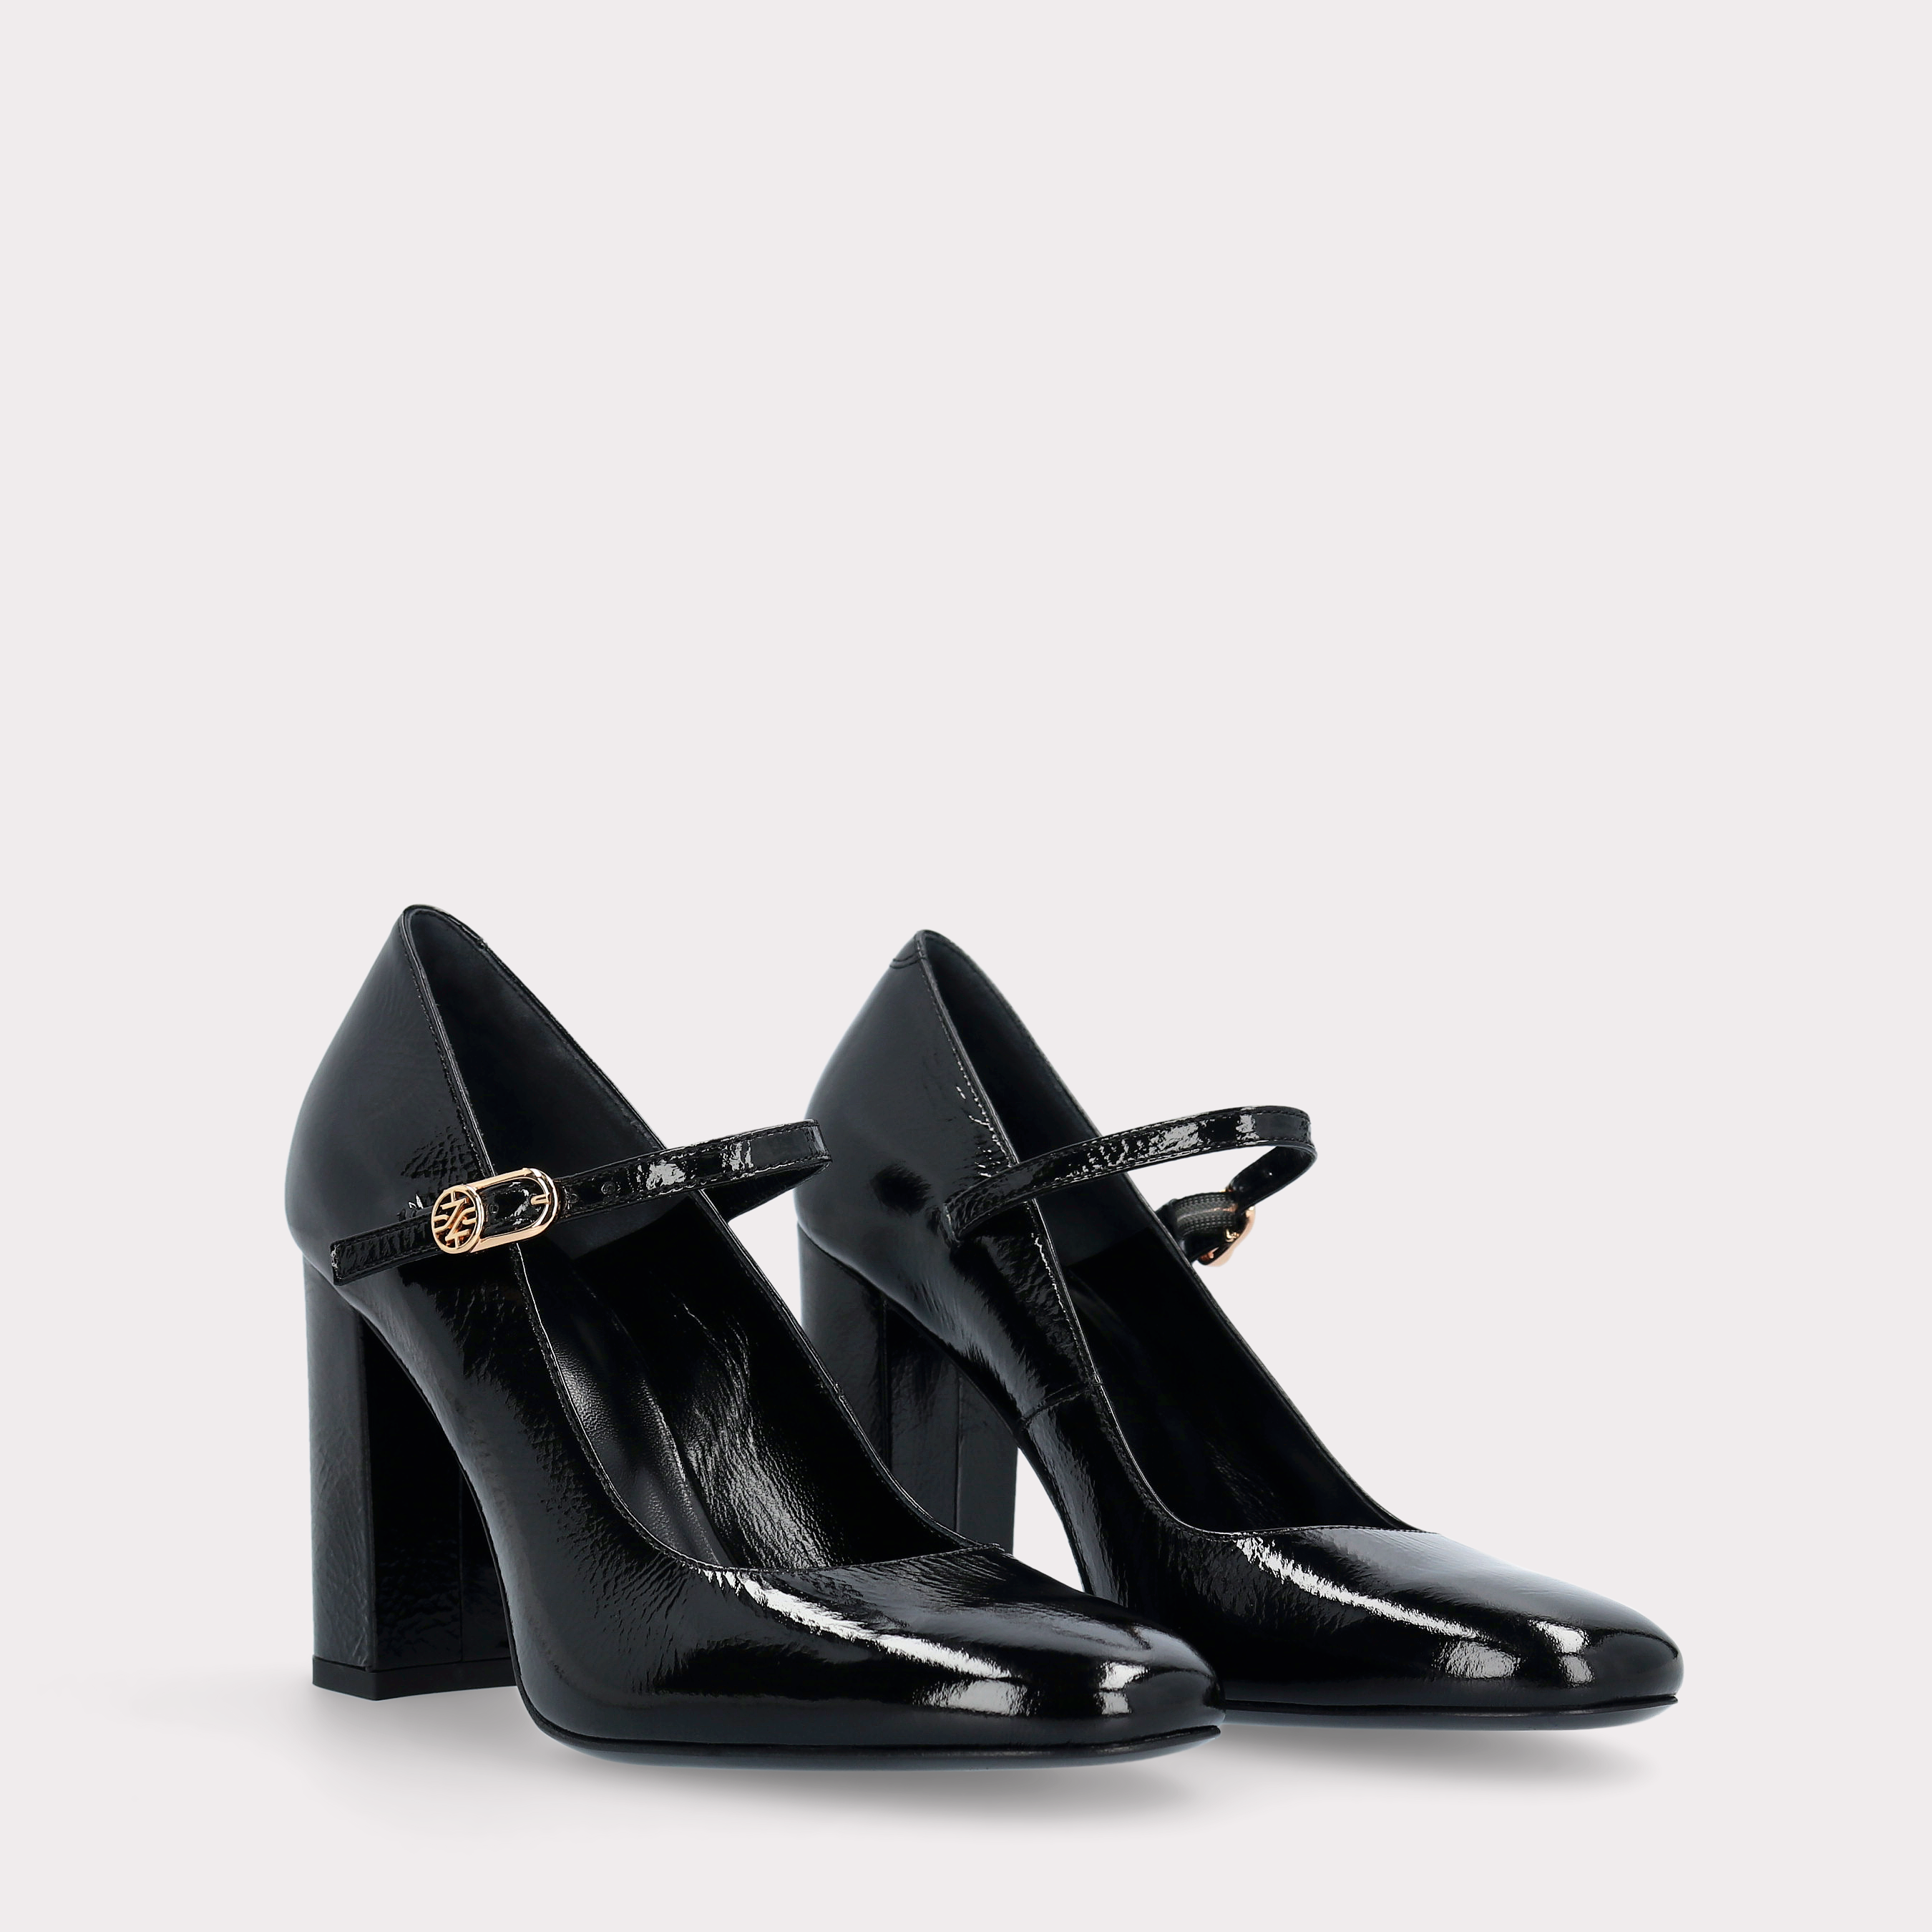 DELMA BEBE 02 BLACK CRUSHED PATENT LEATHER PUMPS